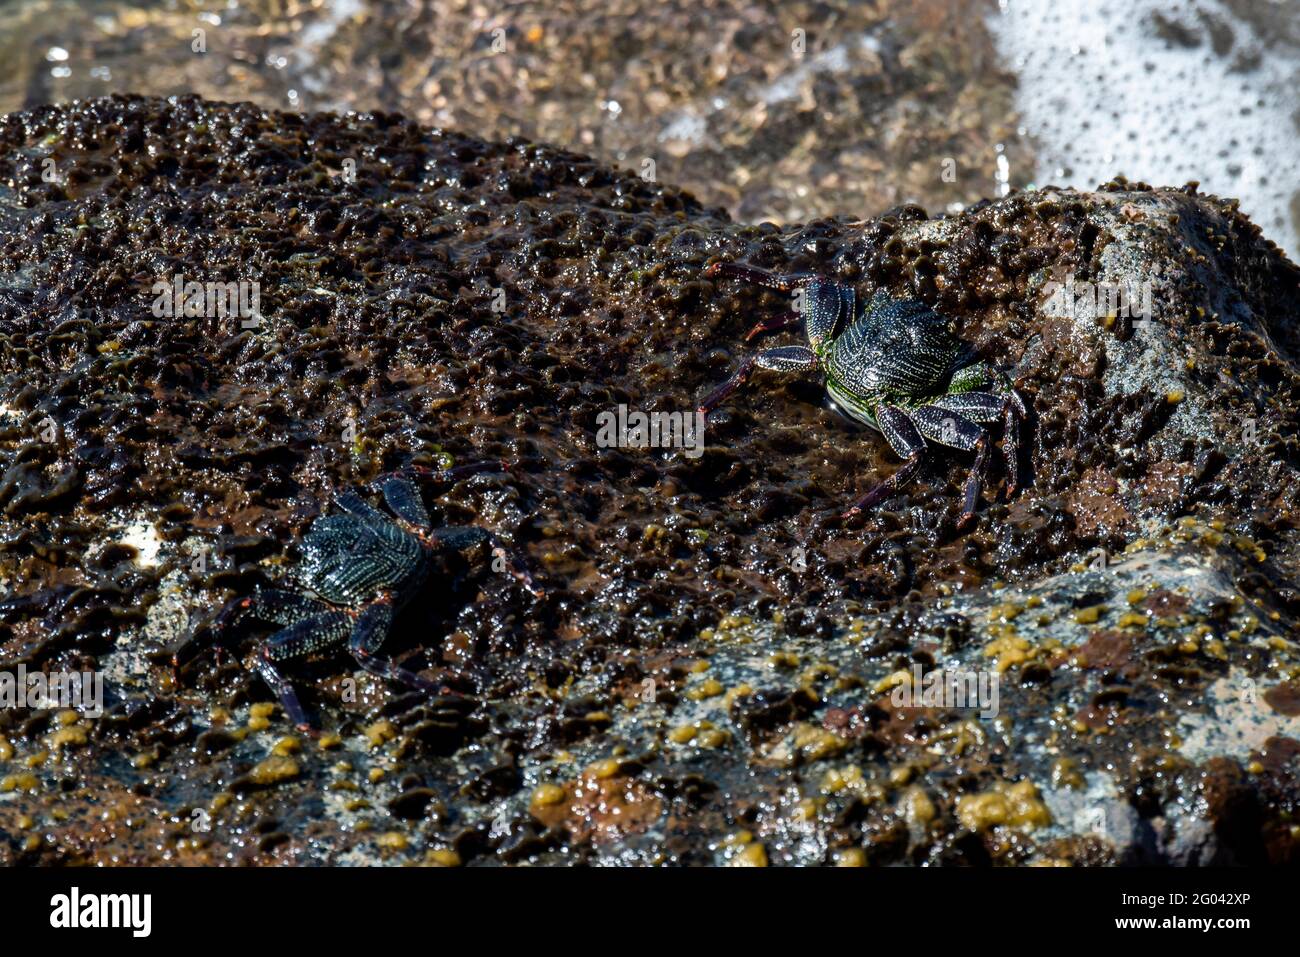 Maui, Hawaii.  Thin-shelled Rock Crabs (Grapsus tenuicrustatus) also called A'ama in Hawaii resting on a rock along the Pacific ocean. Stock Photo